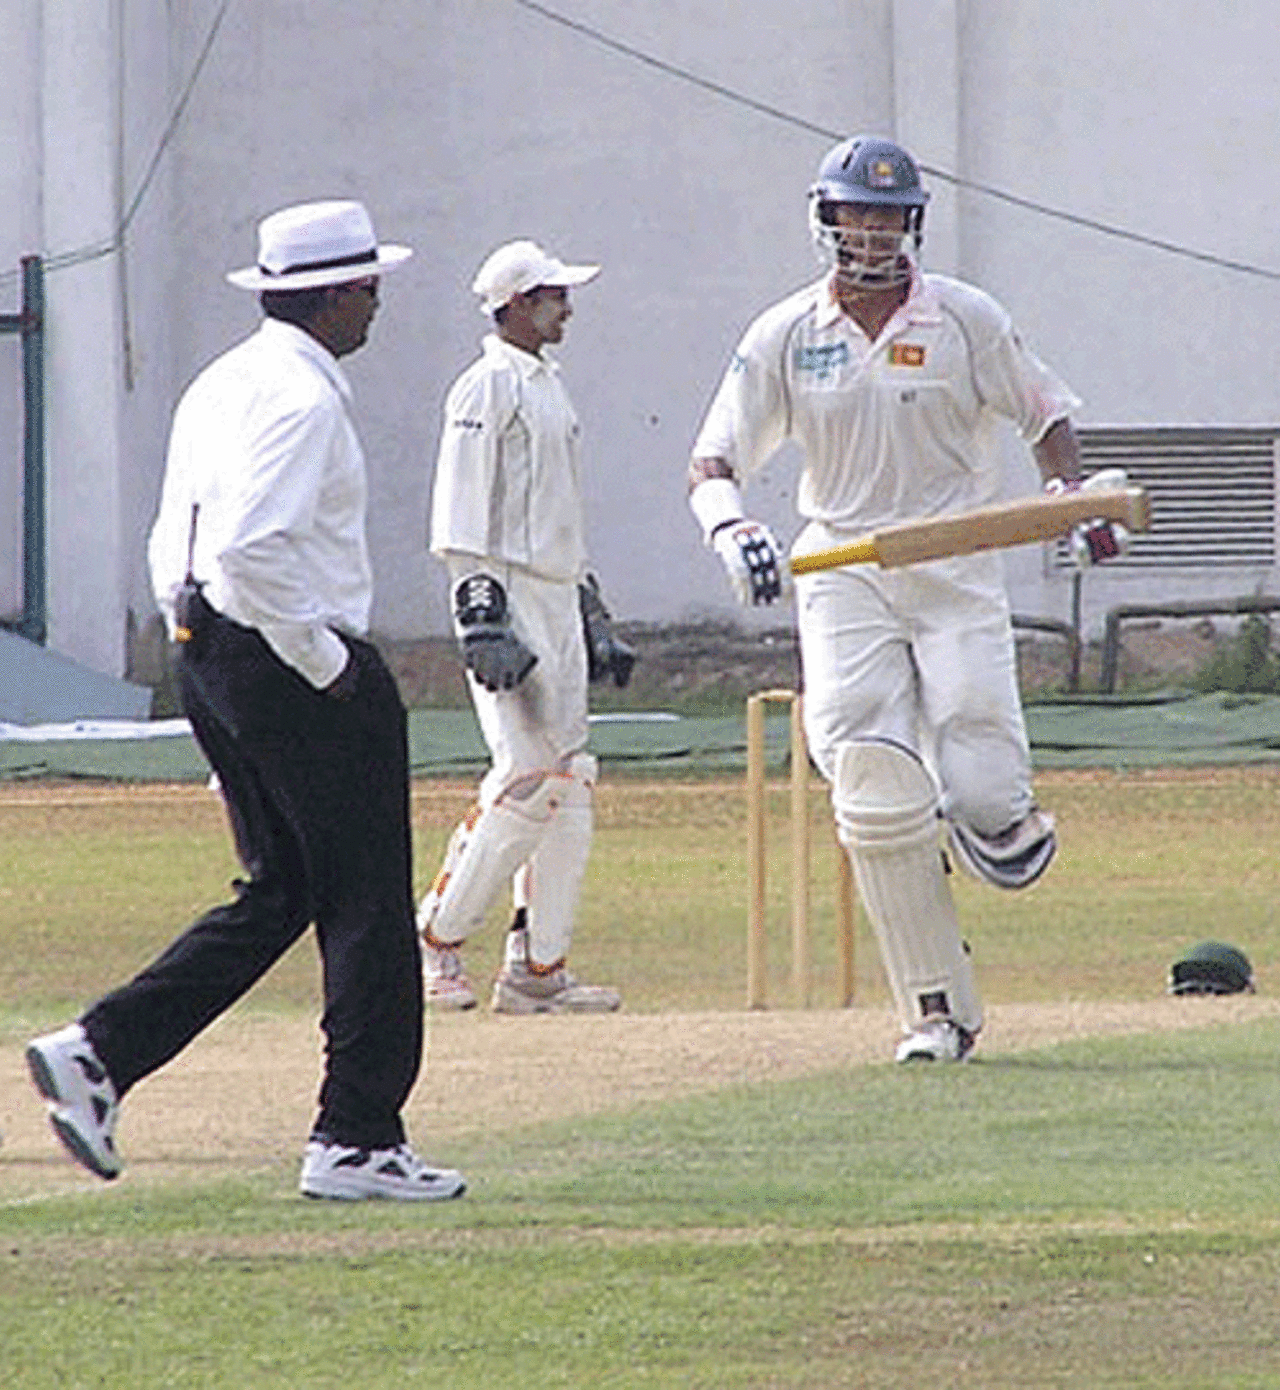 Michael Vandort takes a single on the way to his 12th first-class century, Sri Lanka A v Bangladesh A, 1st day, Colombo, March 25, 2007